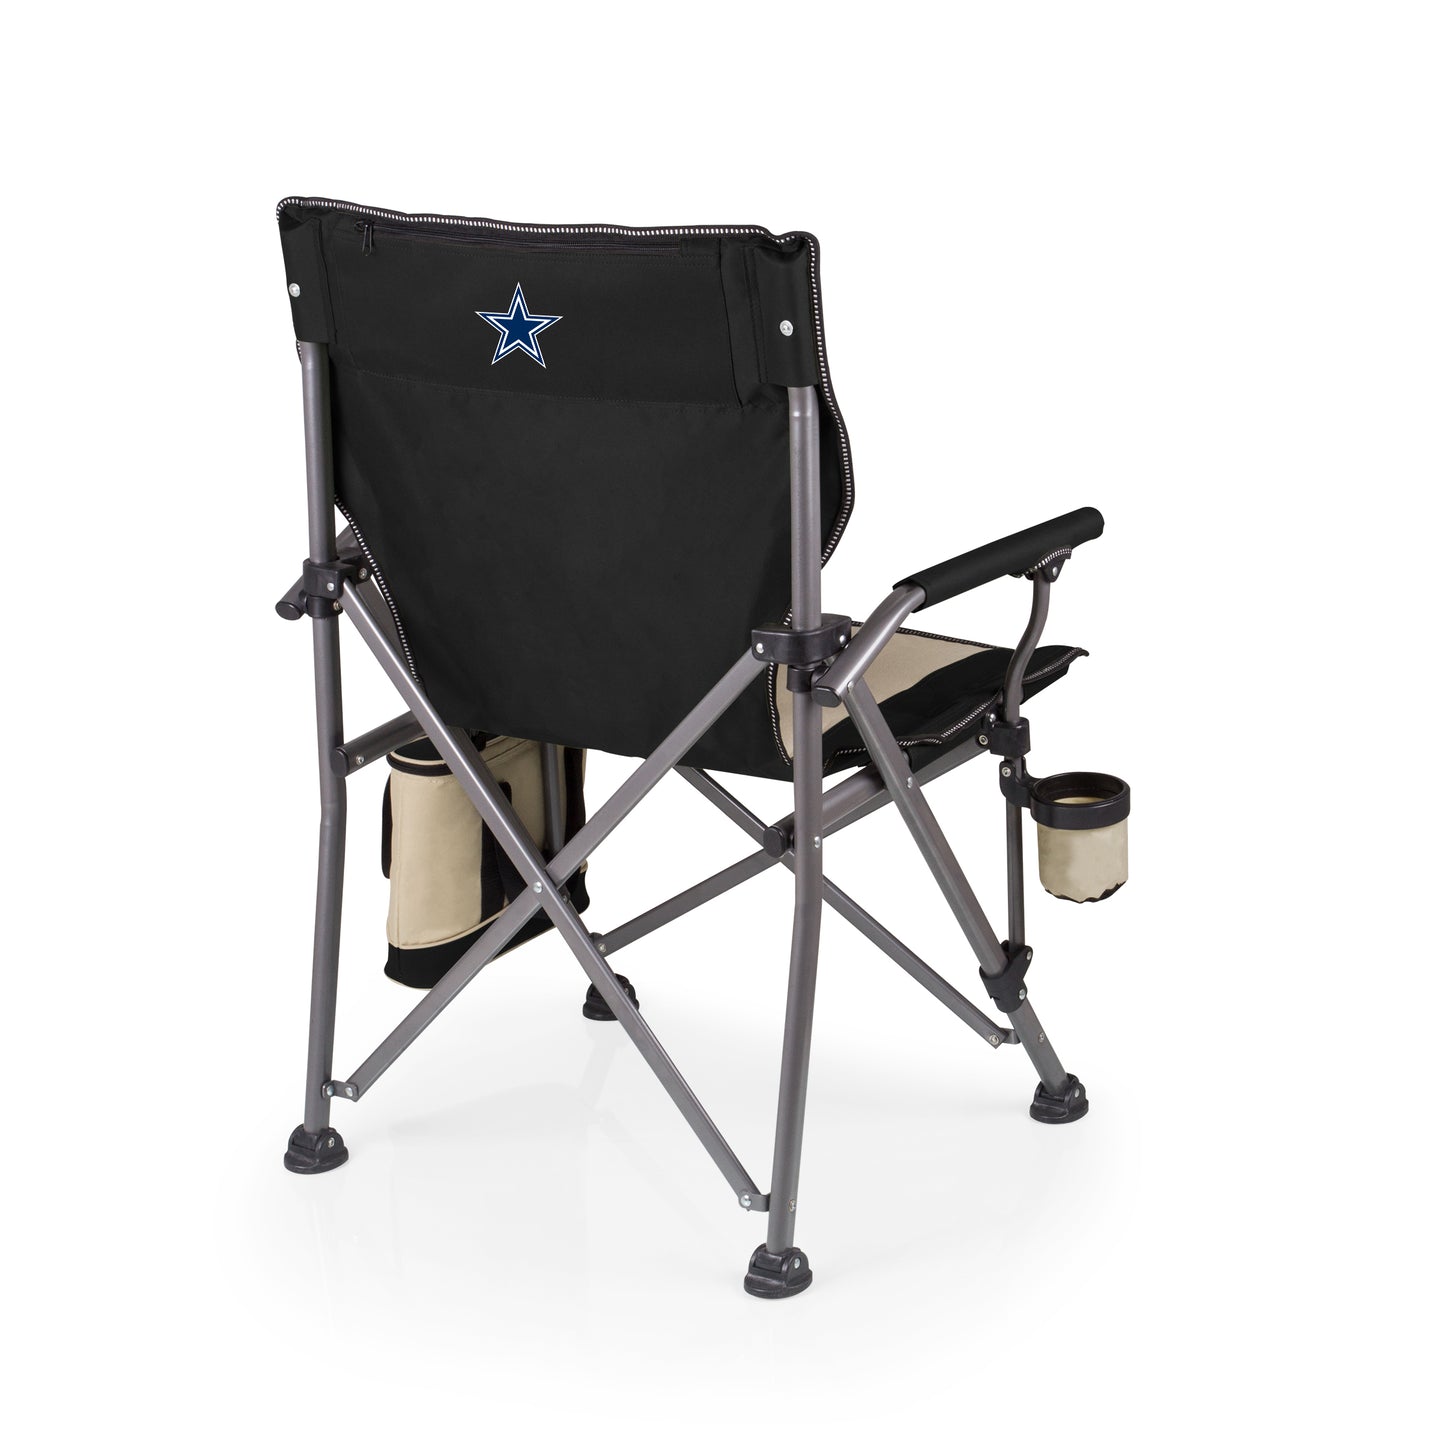 Dallas Cowboys - Outlander Folding Camping Chair with Cooler